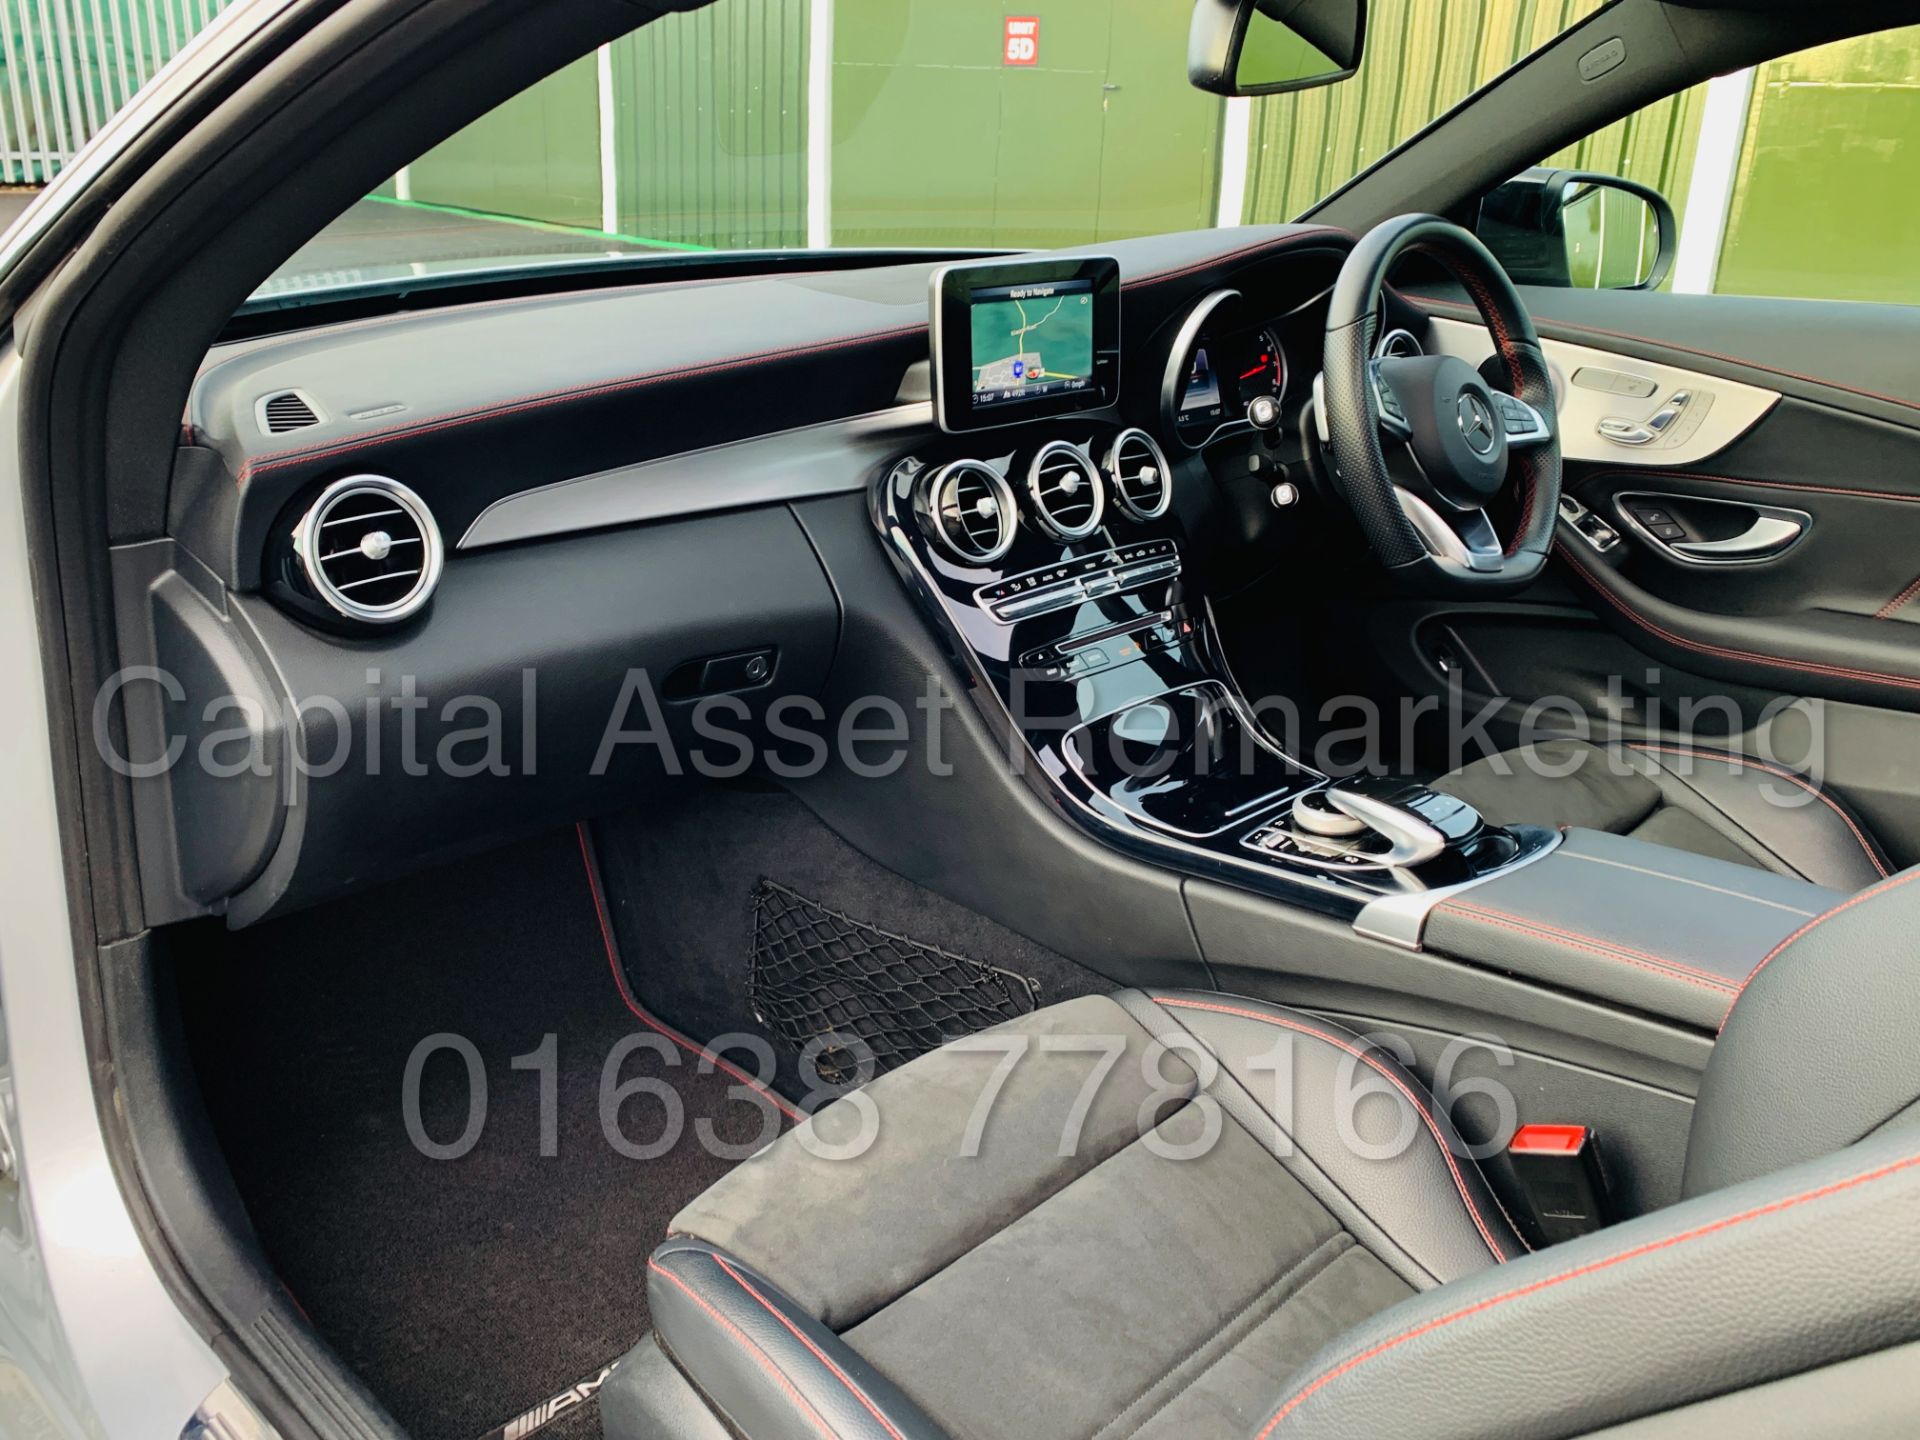 MERCEDES-BENZ C43 AMG *PREMIUM 4 MATIC* COUPE (2017) '9-G AUTO - LEATHER - SAT NAV' **FULLY LOADED** - Image 32 of 67